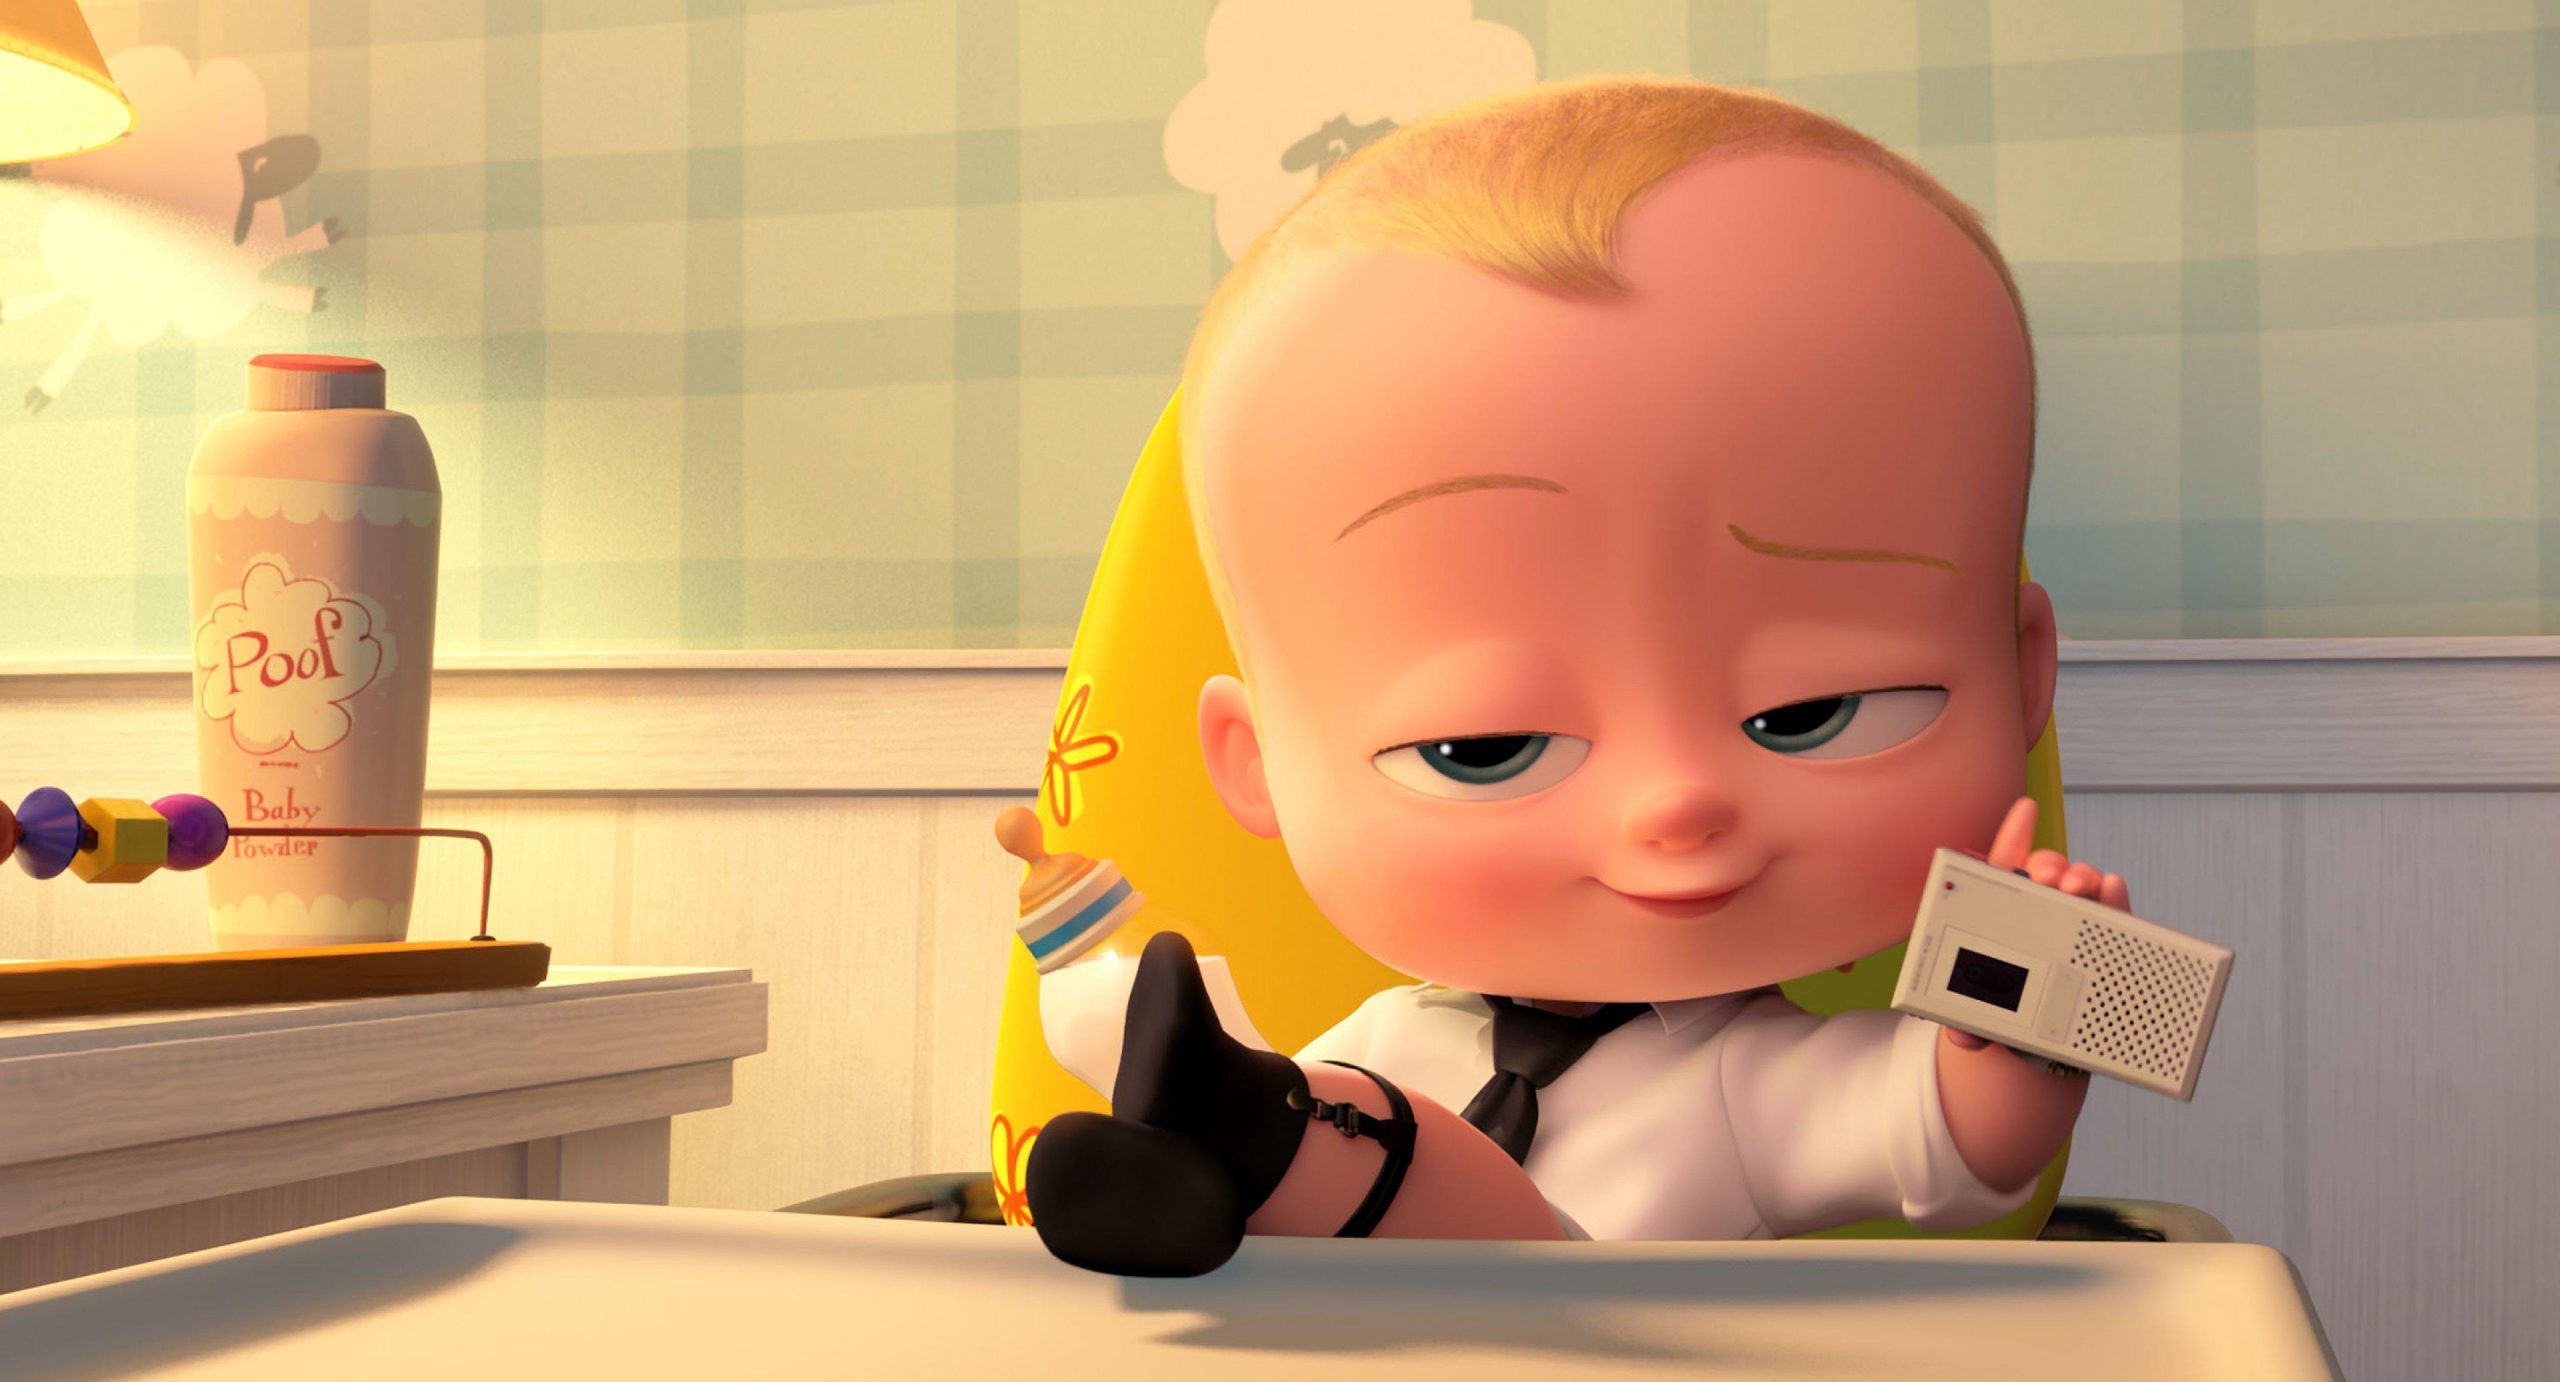 Review: Time to put 'Boss Baby' in the corner?